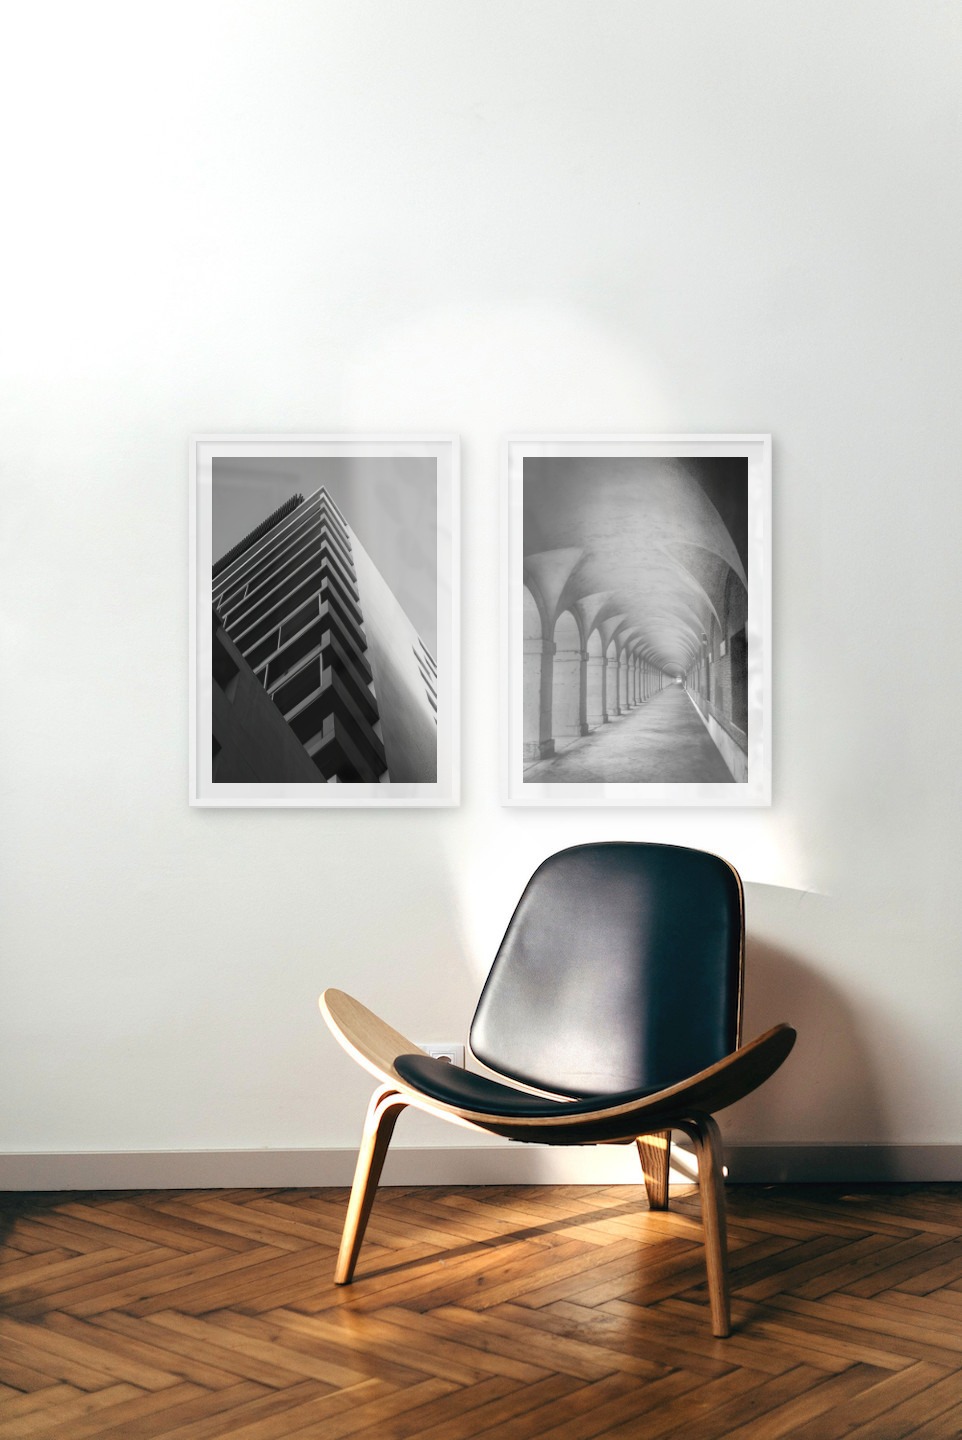 Gallery wall with picture frames in white in sizes 50x70 with prints "Black and white building" and "Hallway with pillars and arches"